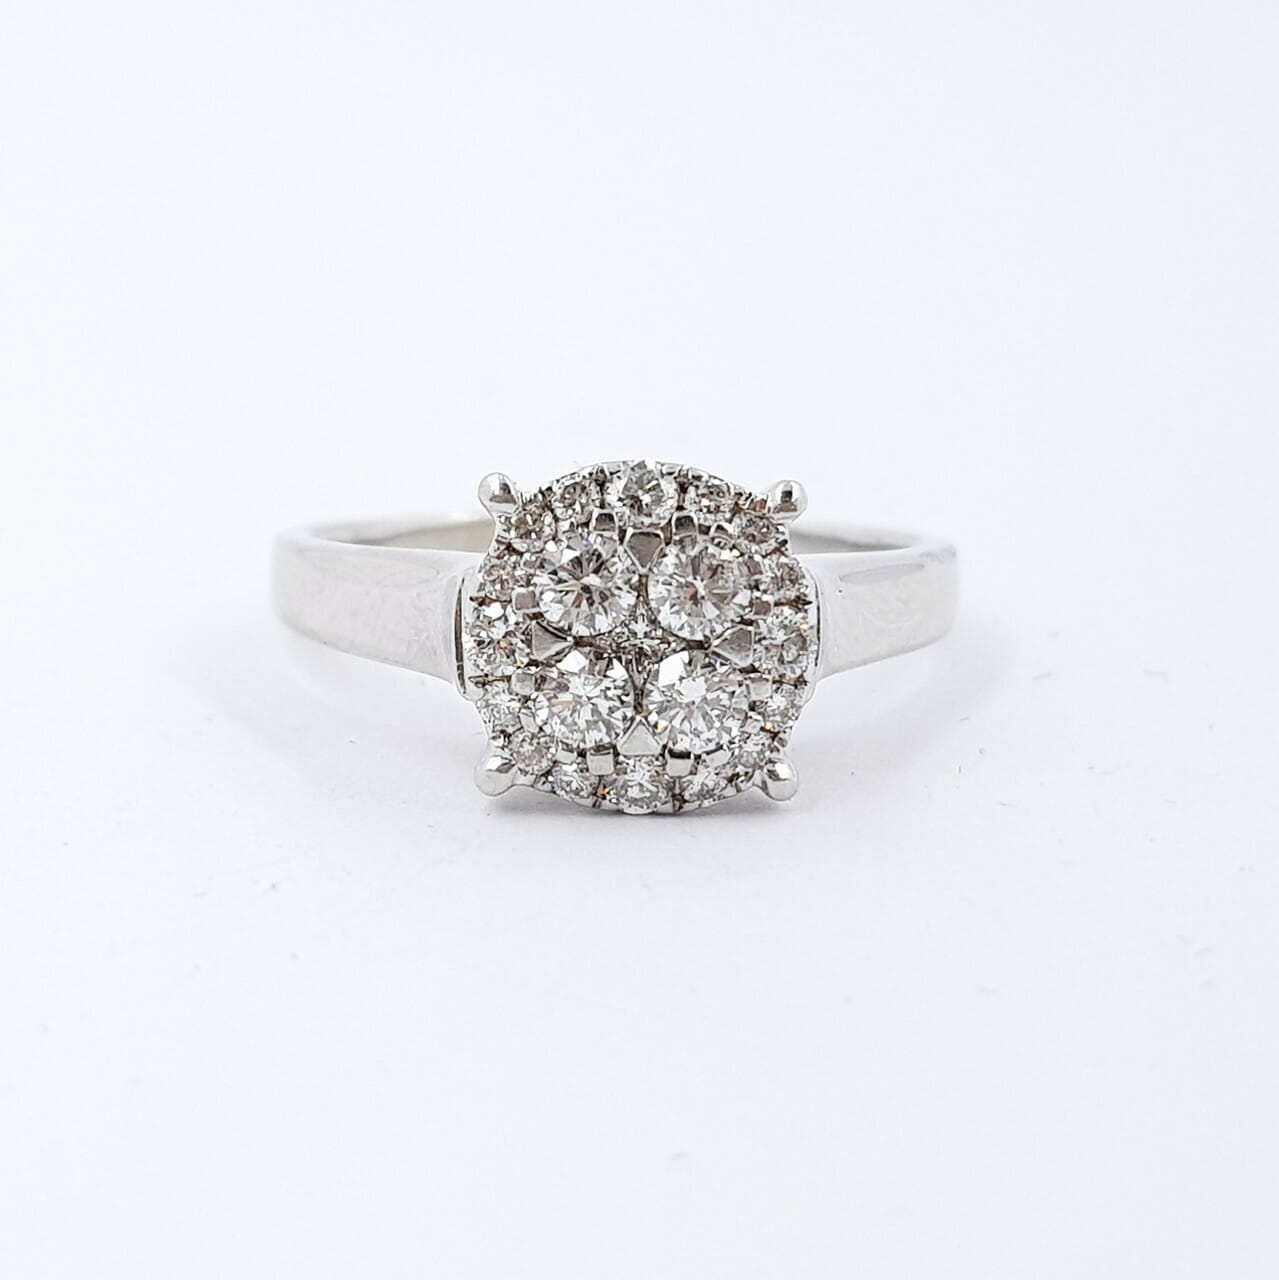 This lovely white gold ring has a flat face design set with round brilliant cut diamonds.